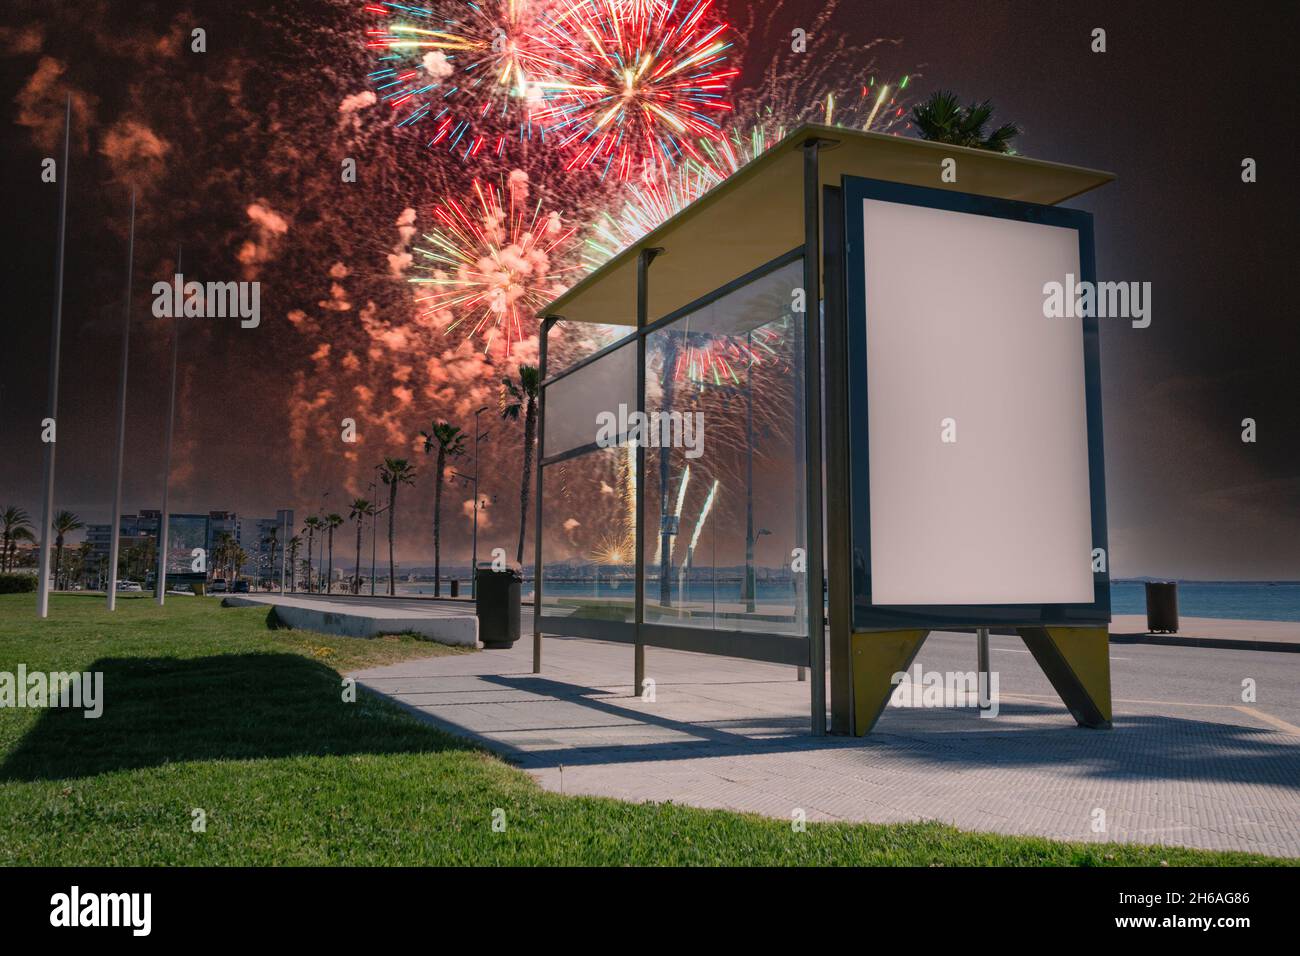 Blank advertisement in a bus stop, with fireworks in the background Stock Photo